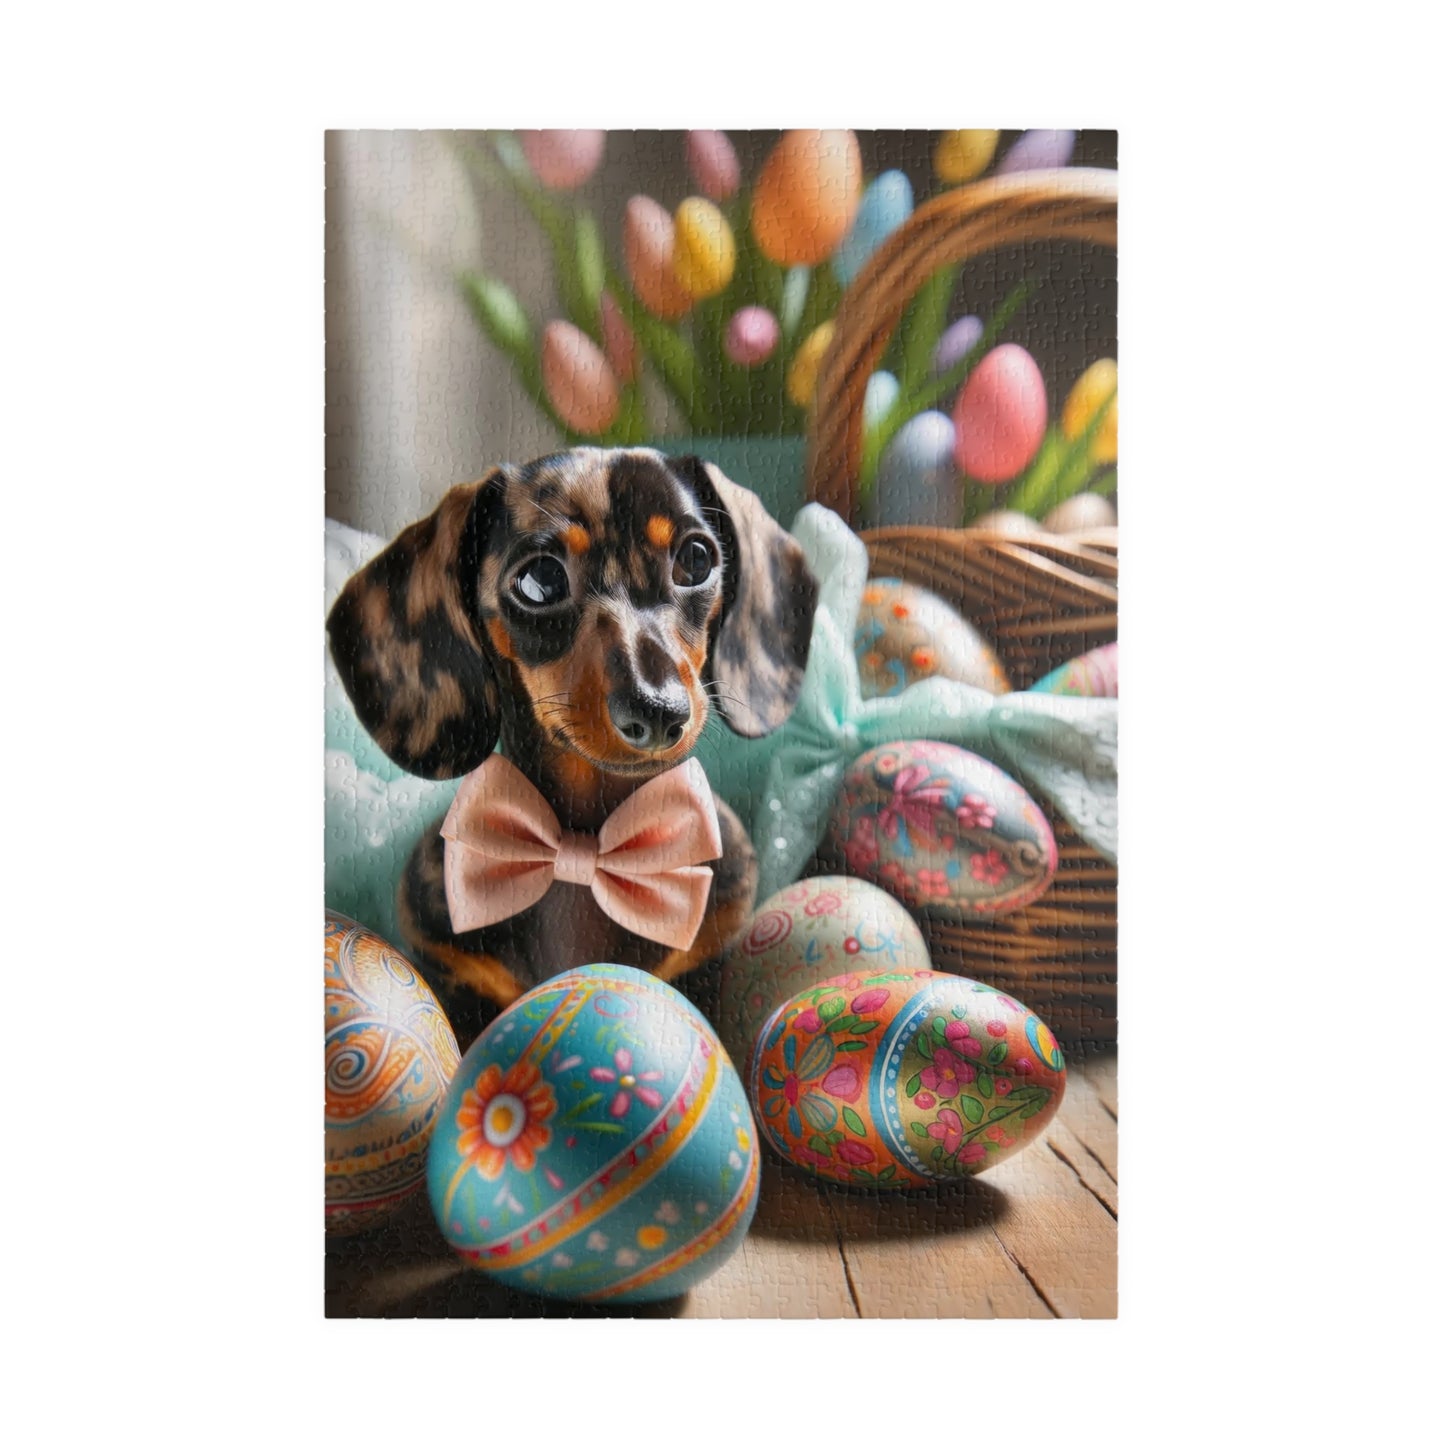 Charming Easter Elegance Miniature Dachshund Jigsaw Puzzle - Brindle Mini Doxie, Family Fun Activity 110, 252, 520 or 1014 Pieces